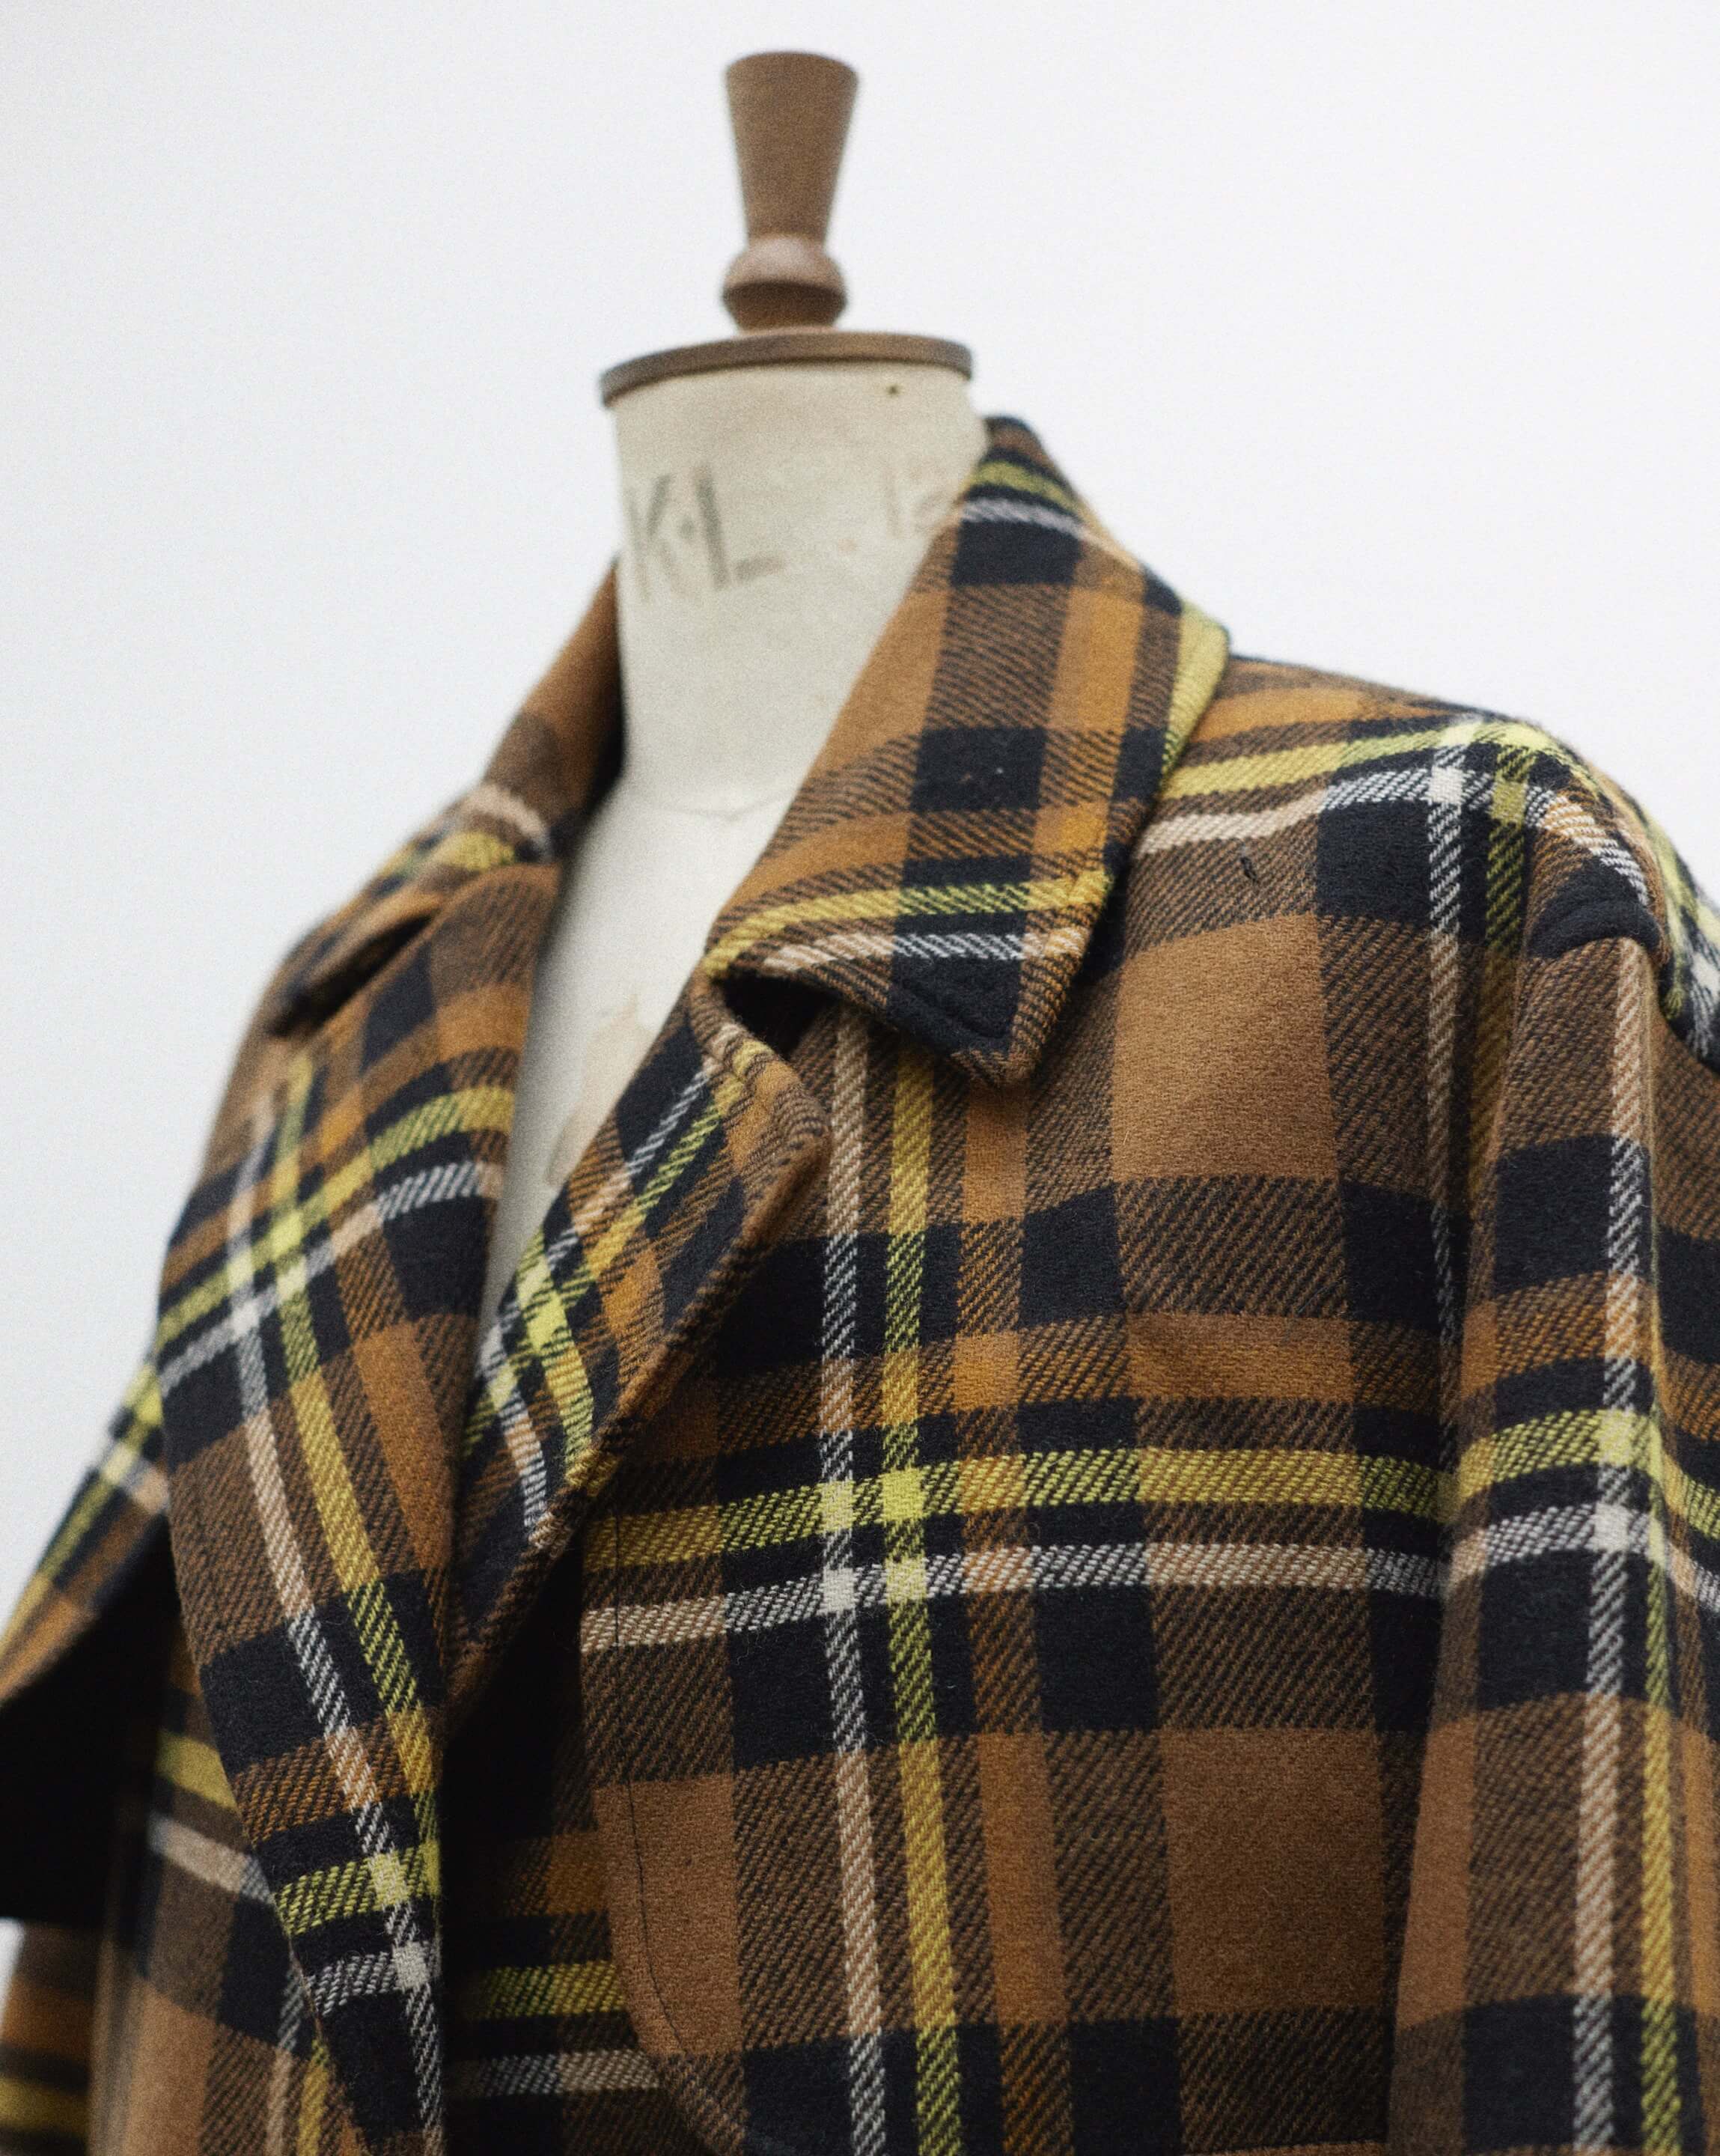 Checked coat on a sewing mannequin.